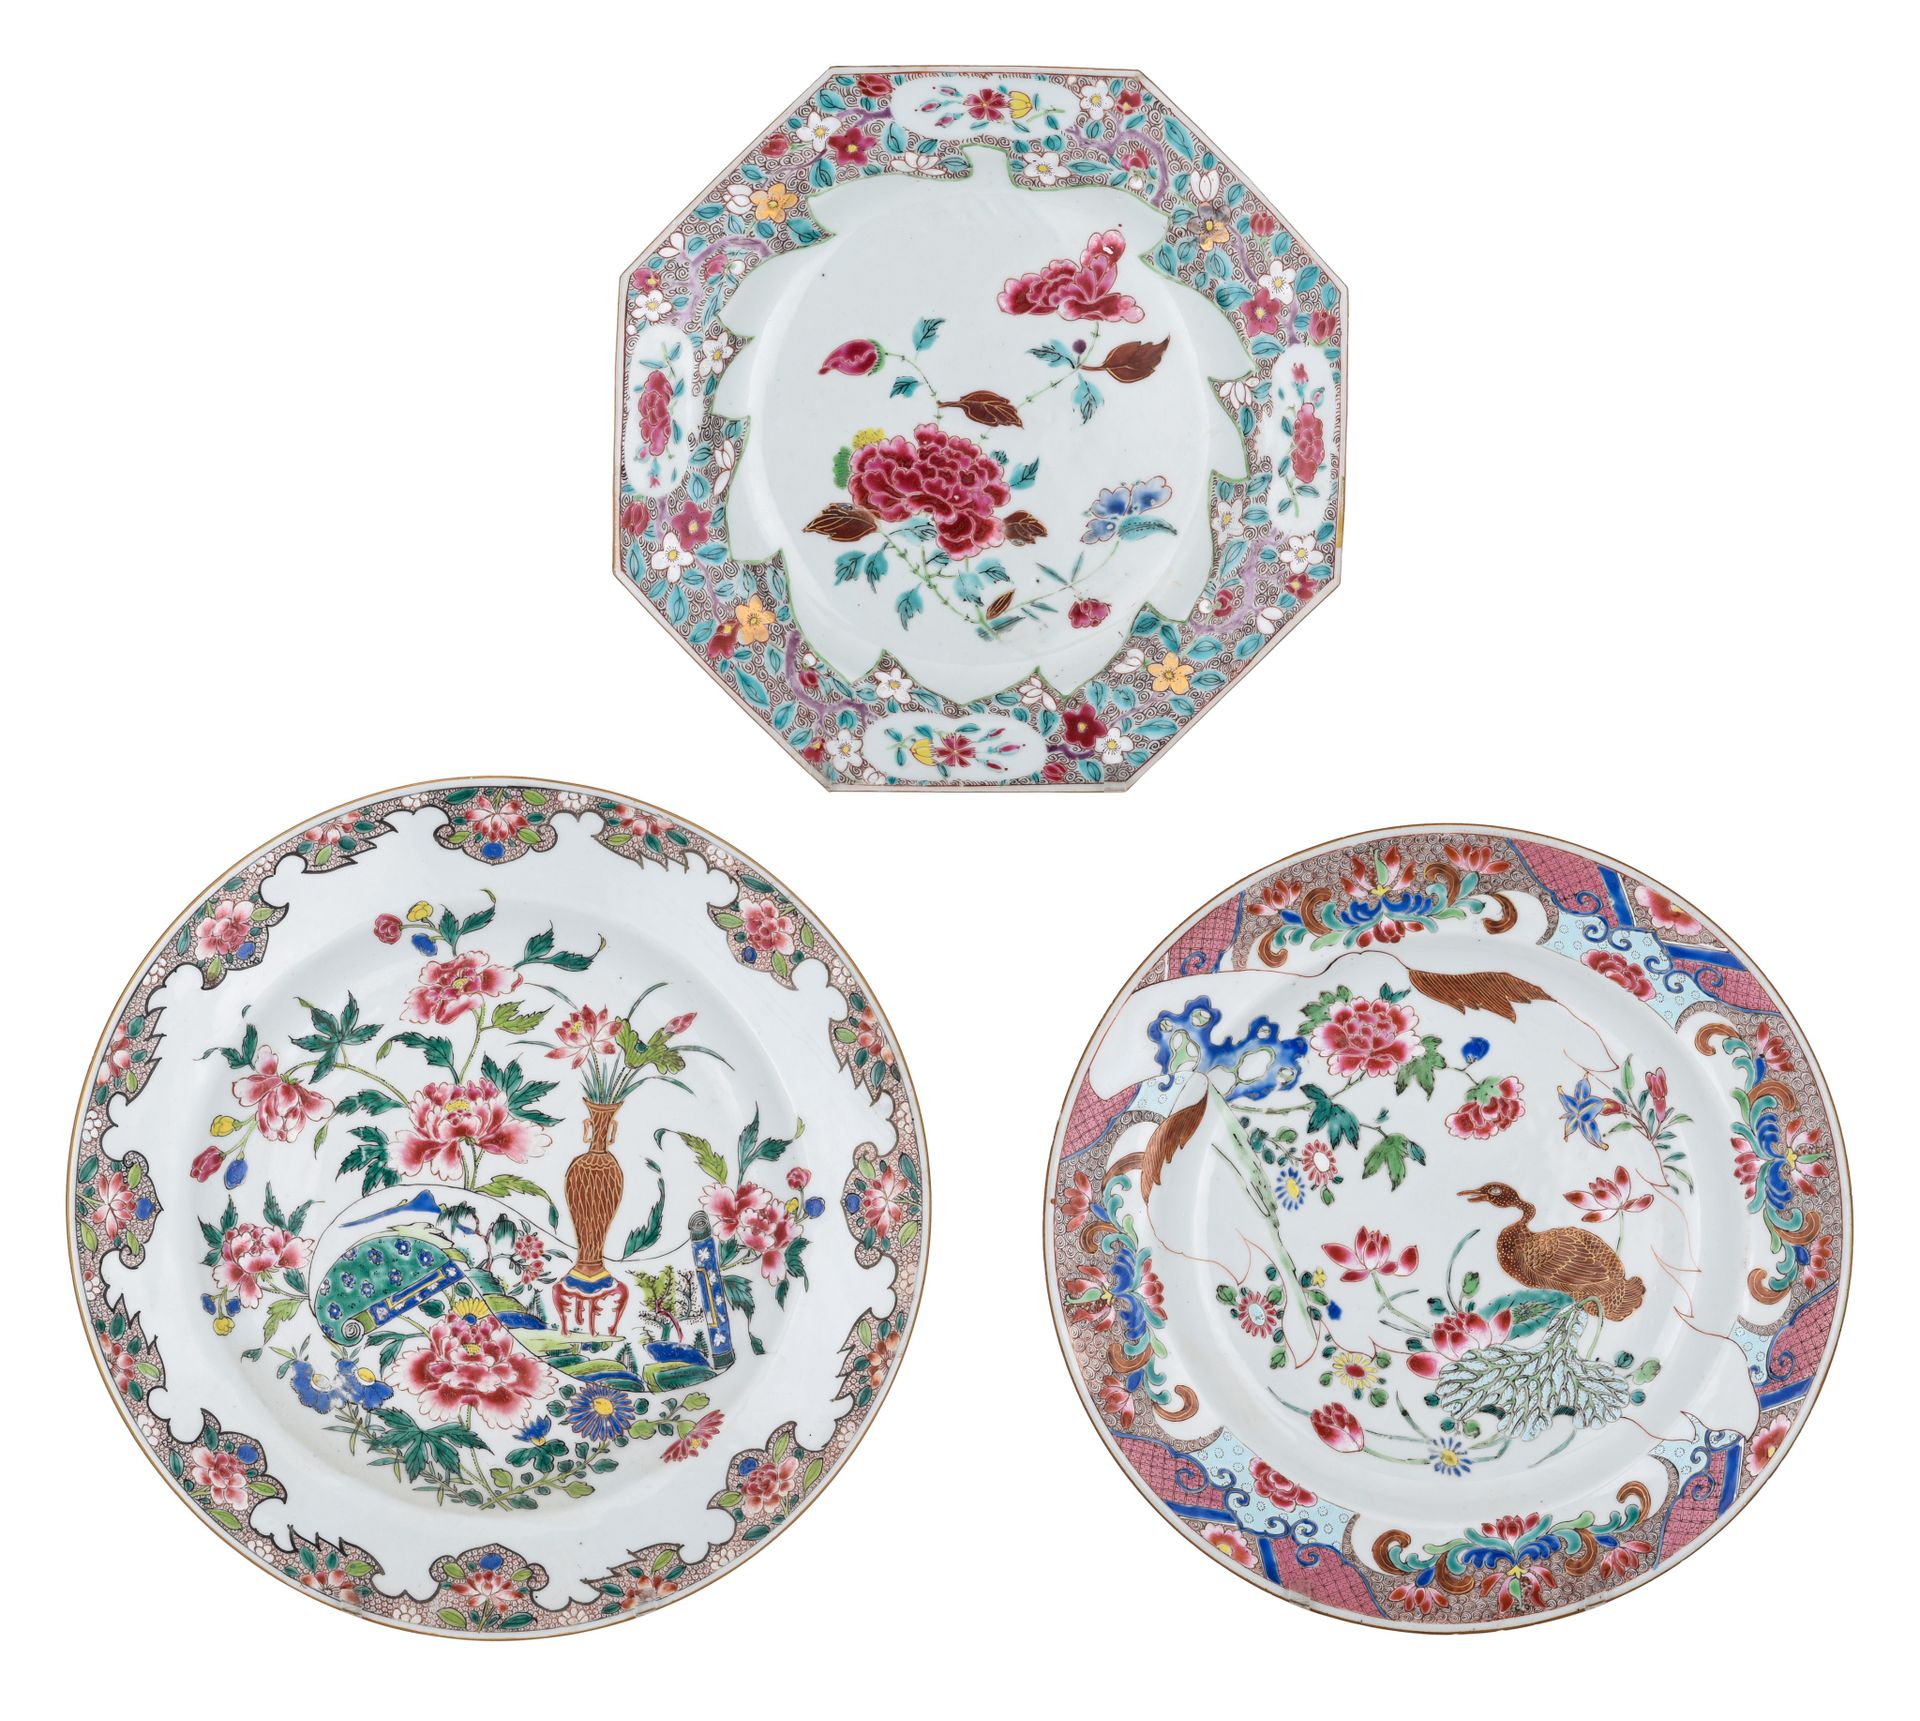 Three Chinese famille rose export porcelain plates, 18thC, dia. 29 - 35 cm Three&hellip;